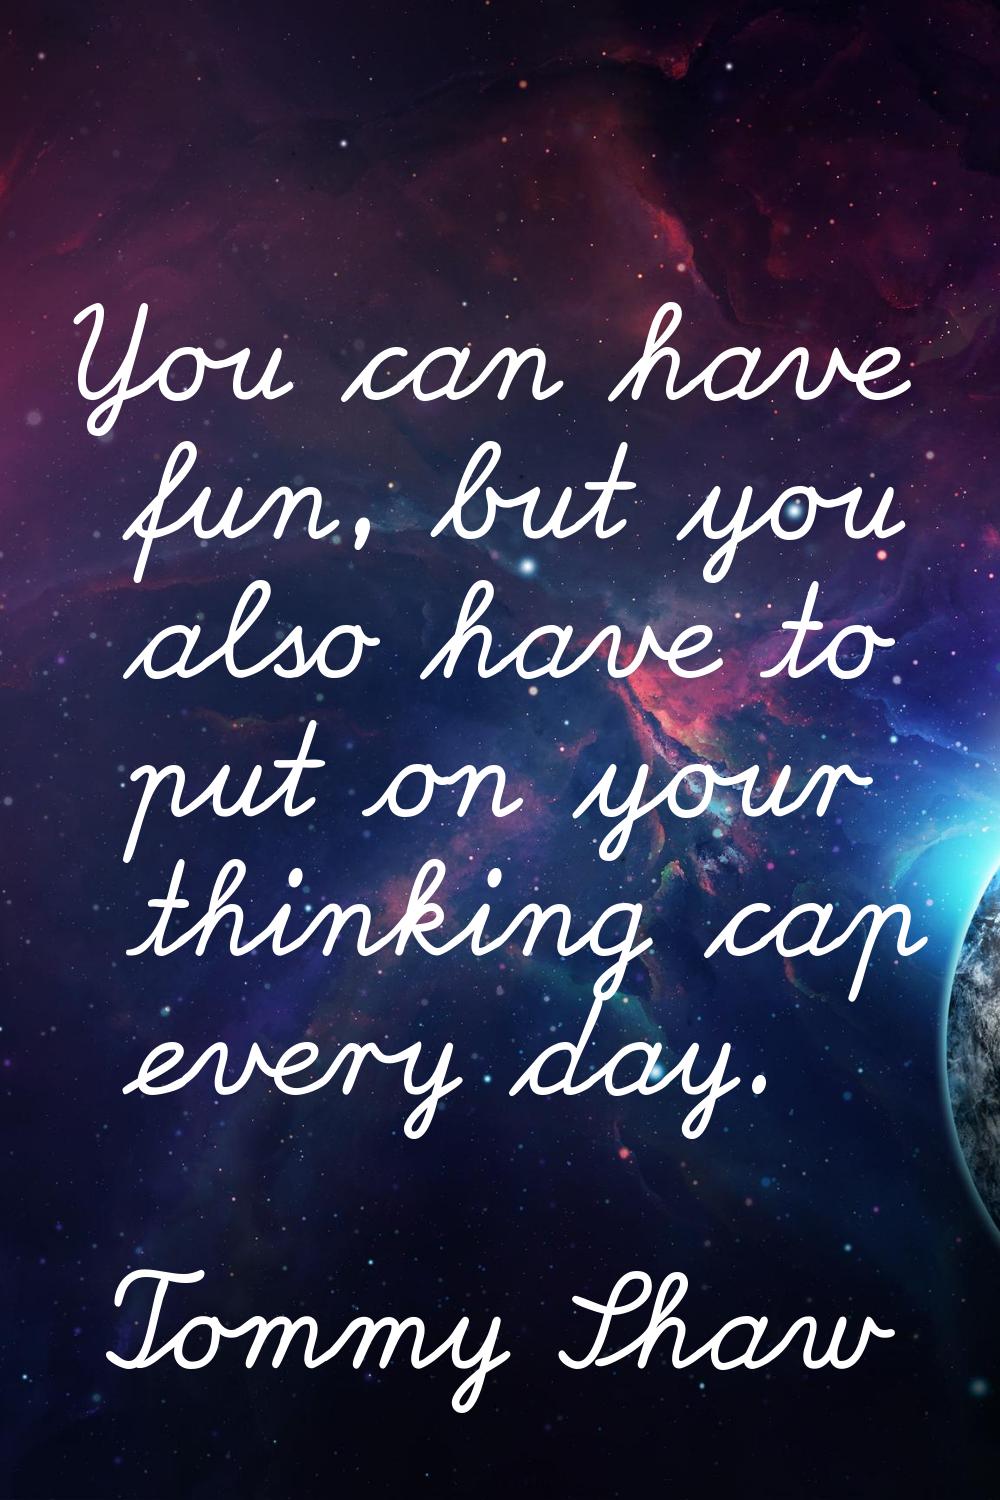 You can have fun, but you also have to put on your thinking cap every day.